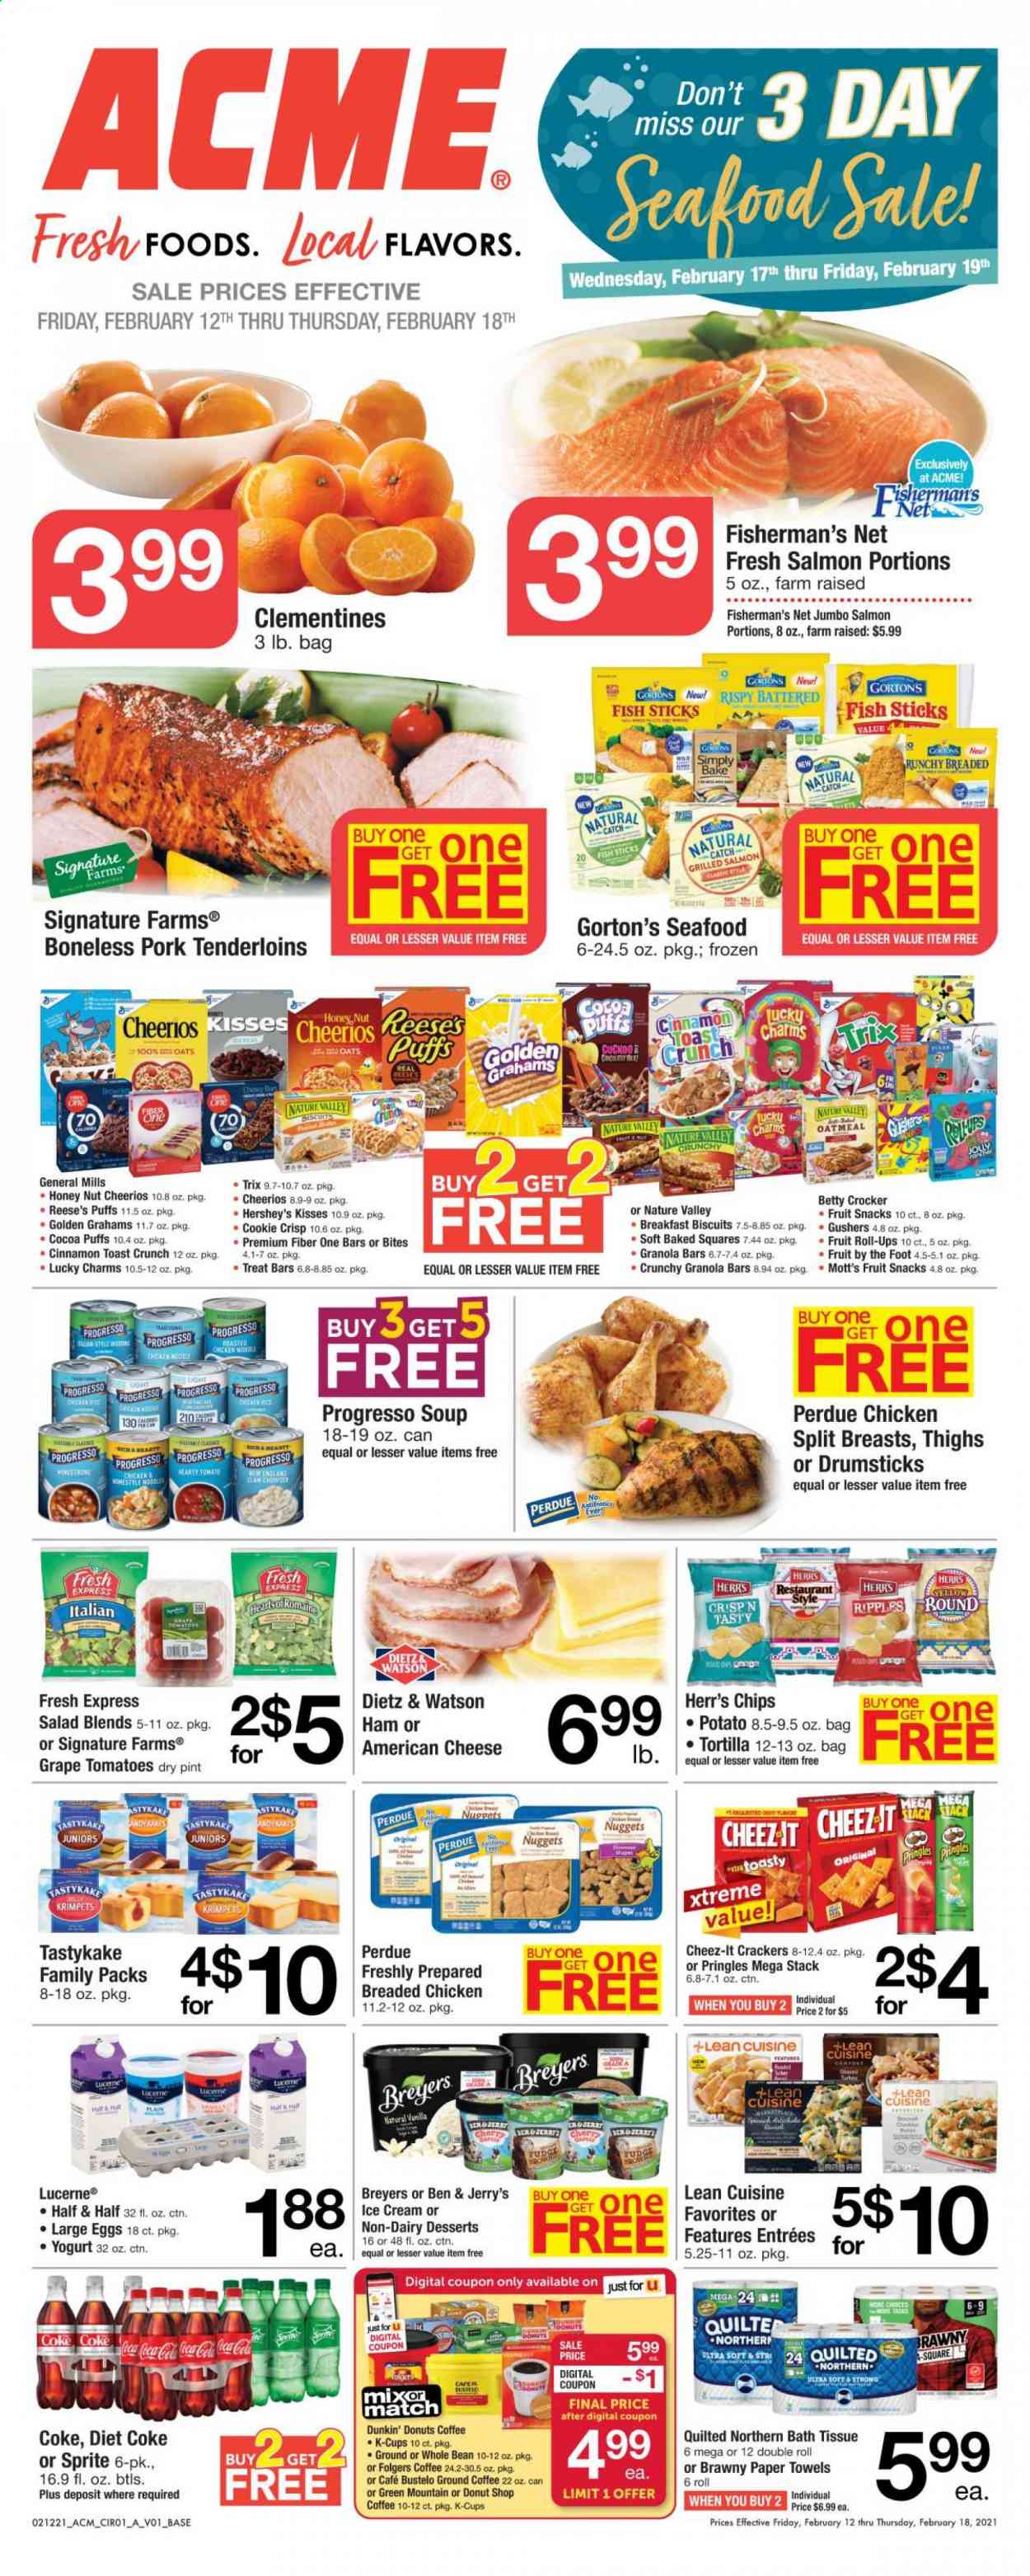 thumbnail - ACME Flyer - 02/12/2021 - 02/18/2021 - Sales products - tortillas, toast bread, puffs, Dunkin' Donuts, salmon, seafood, fish, Gorton's, nuggets, salad, fried chicken, Progresso, Lean Cuisine, Perdue®, fish sticks, ham, Dietz & Watson, american cheese, cheese, yoghurt, large eggs, ice cream, Reese's, Hershey's, Ben & Jerry's, fudge, crackers, biscuit, fruit snack, Pringles, Cheez-It, cocoa, oatmeal, oats, clam chowder, Cheerios, granola bar, Trix, Nature Valley, Fiber One, cinnamon, Coca-Cola, Sprite, Diet Coke, Mott's, coffee, Folgers, ground coffee, coffee capsules, K-Cups, Green Mountain, pork tenderloin, bath tissue, Quilted Northern, kitchen towels, paper towels. Page 3.